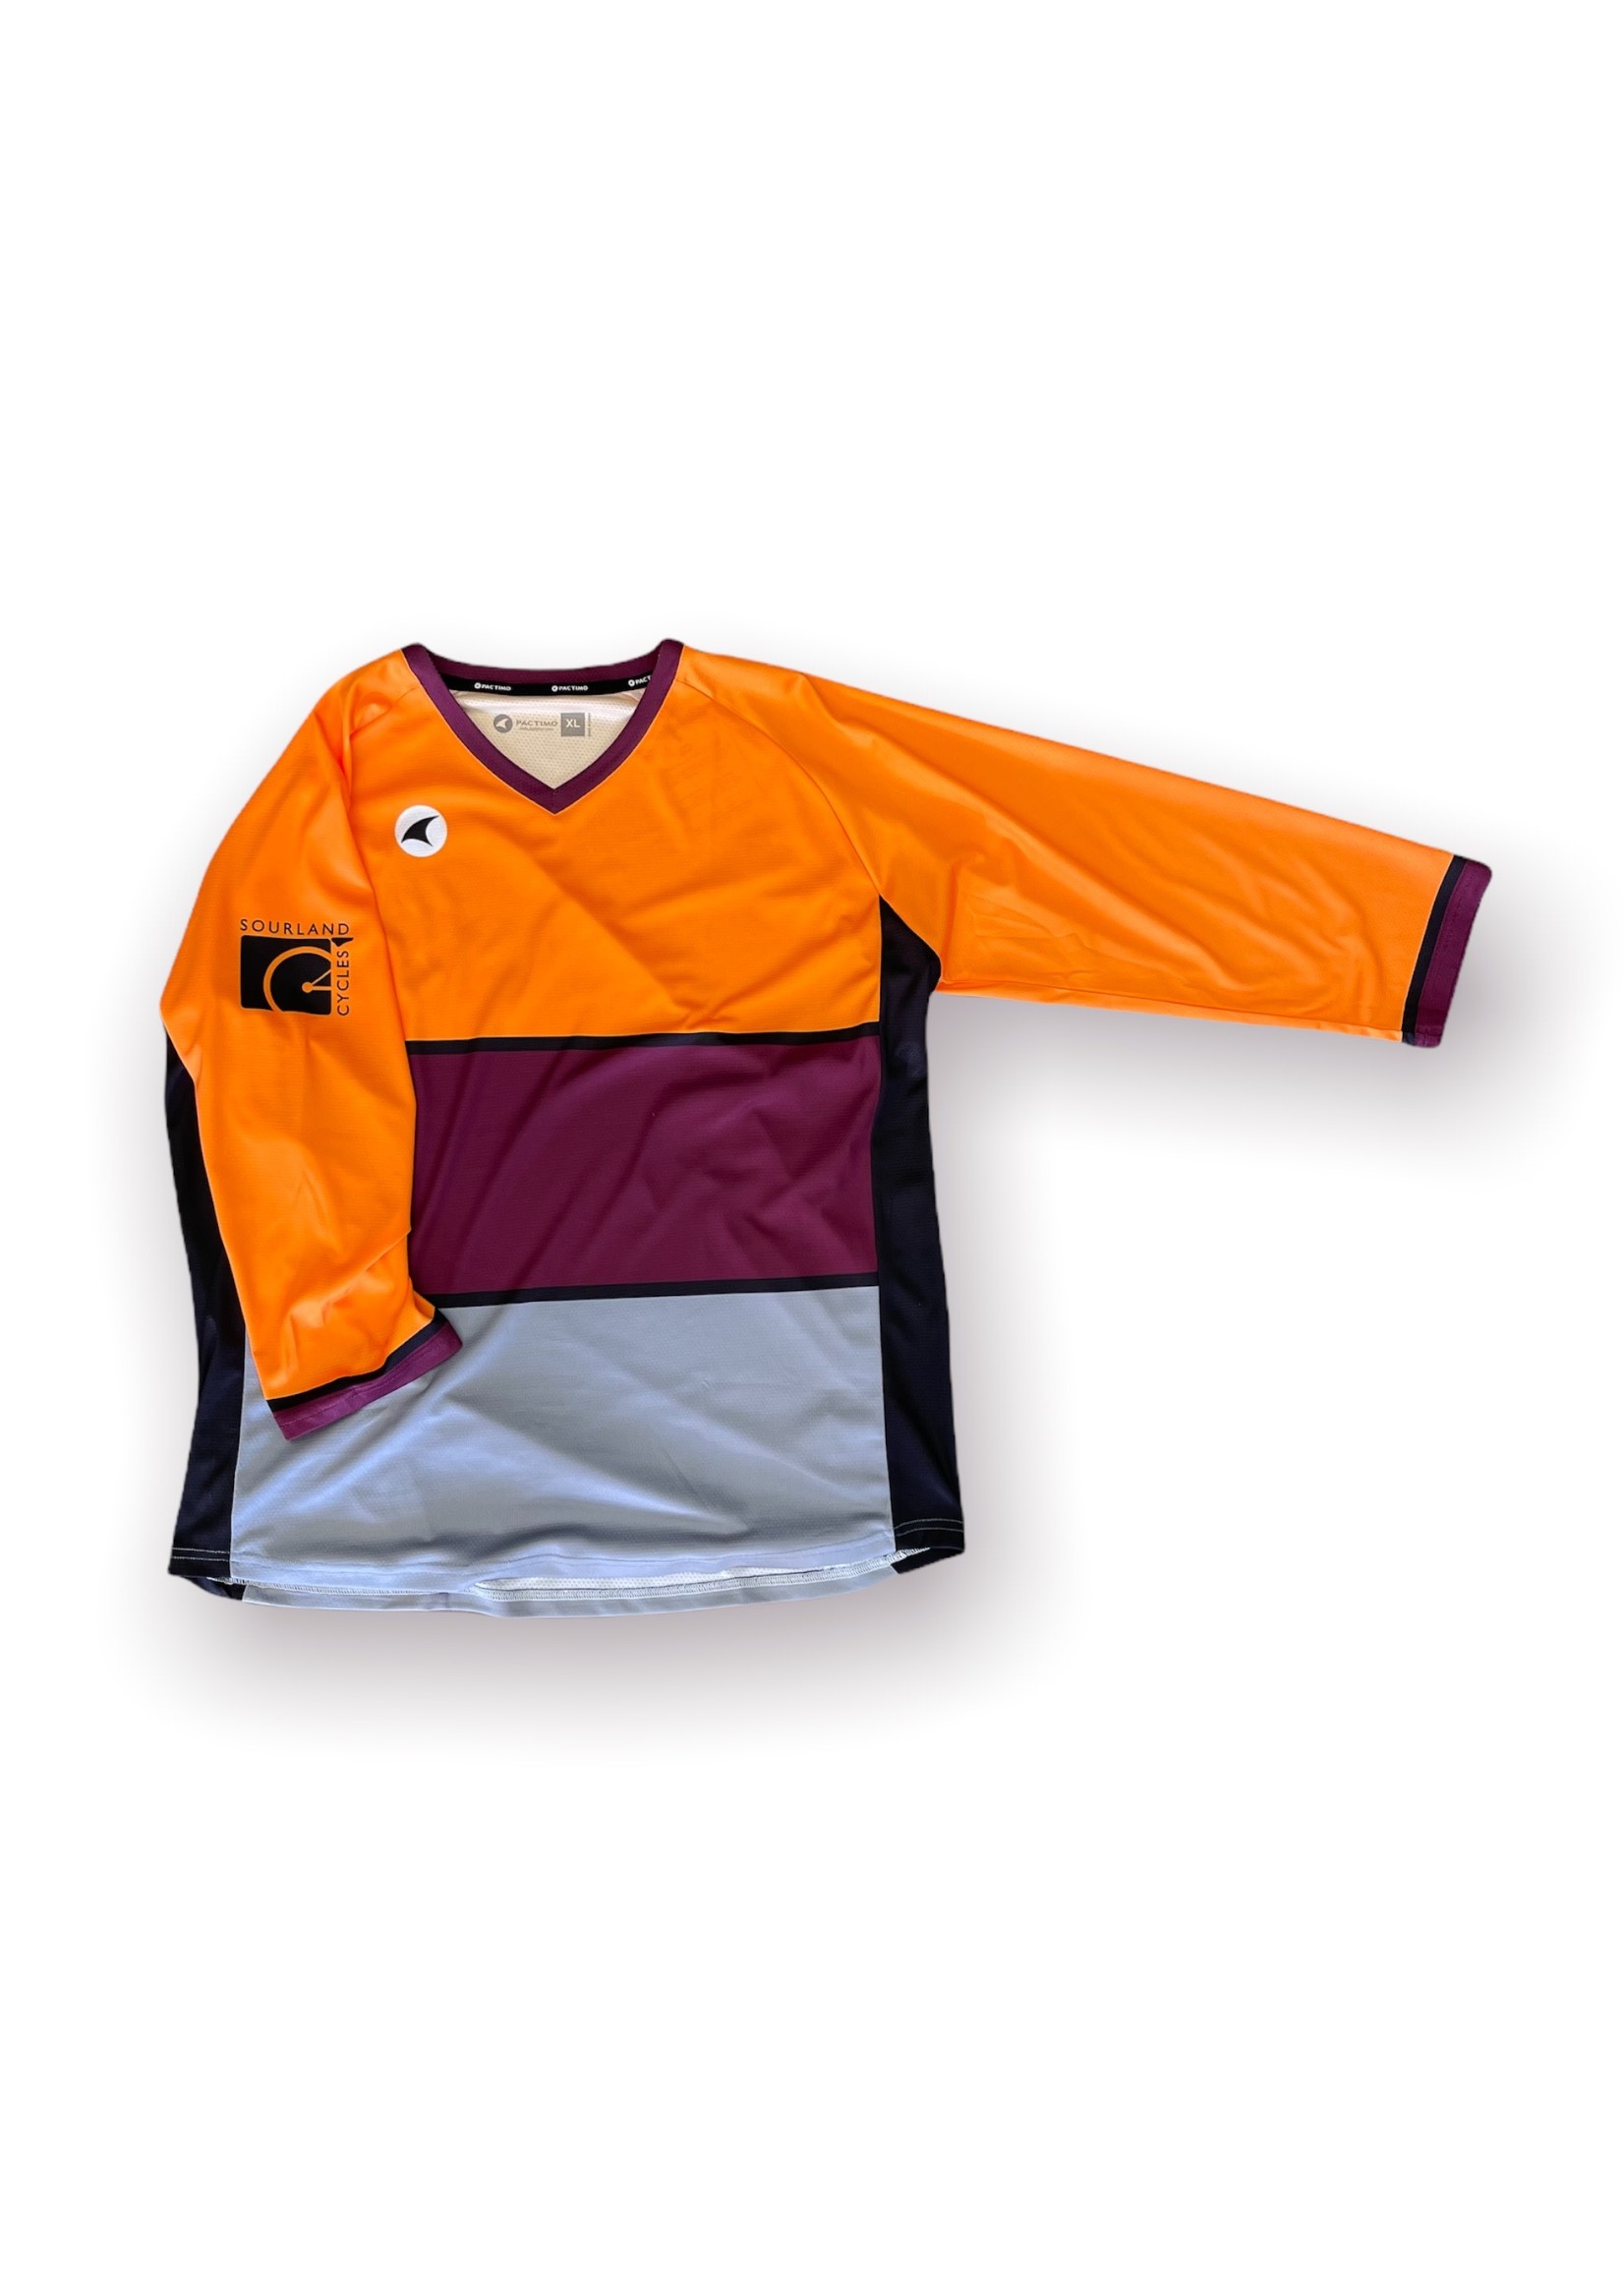 Pactimo Sourland Pactimo Mountain Jersey (Long Sleeve)